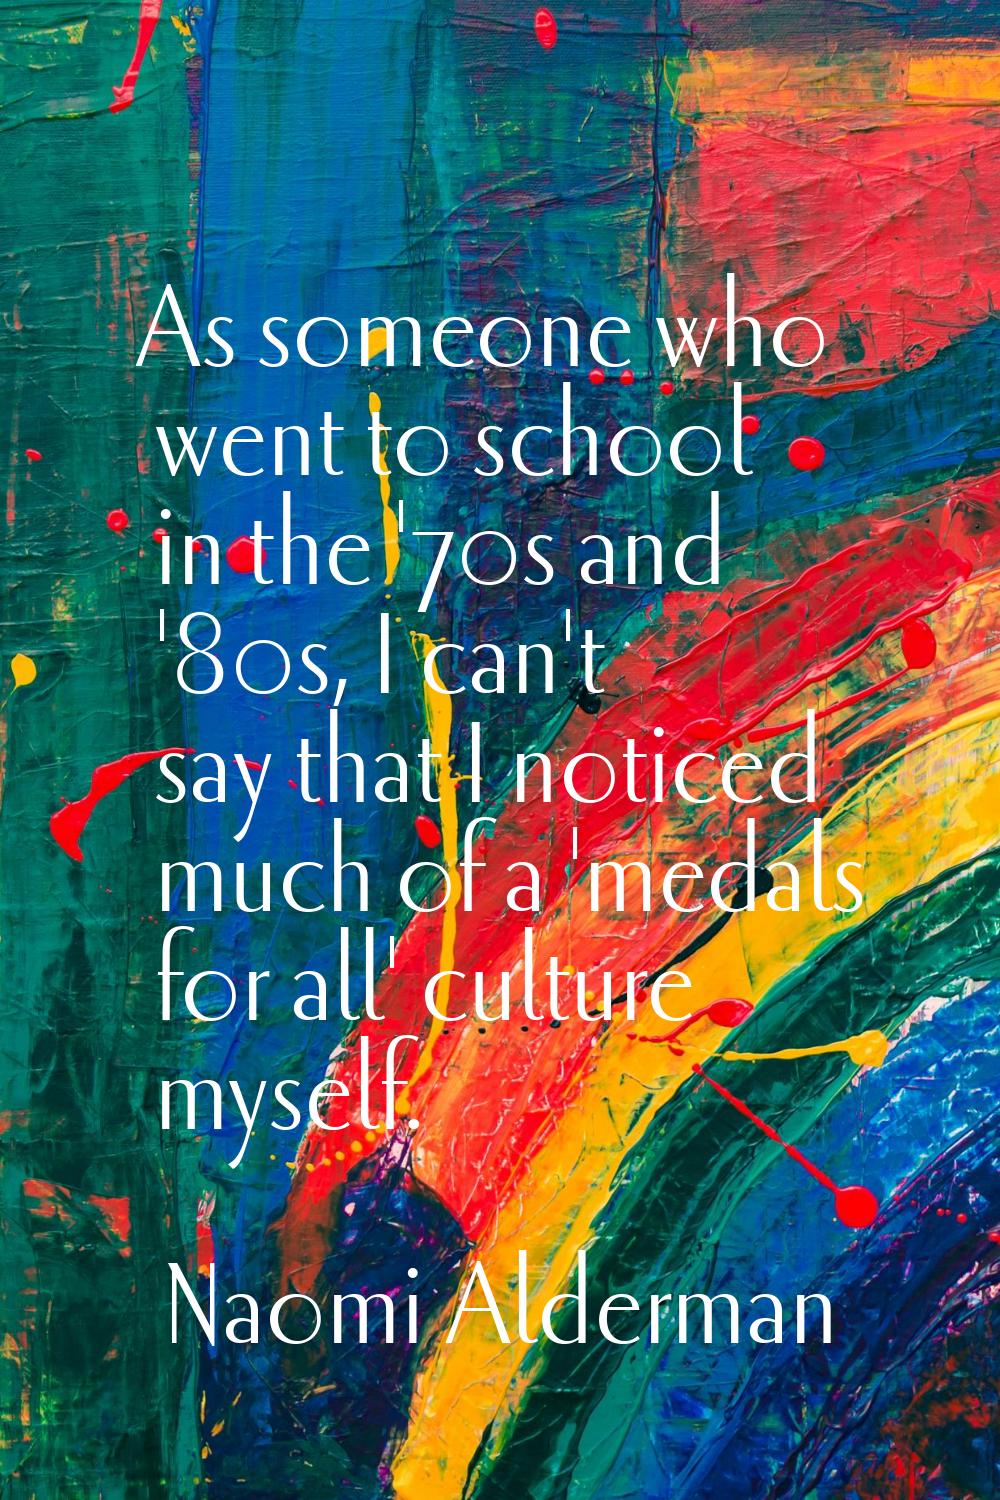 As someone who went to school in the '70s and '80s, I can't say that I noticed much of a 'medals fo